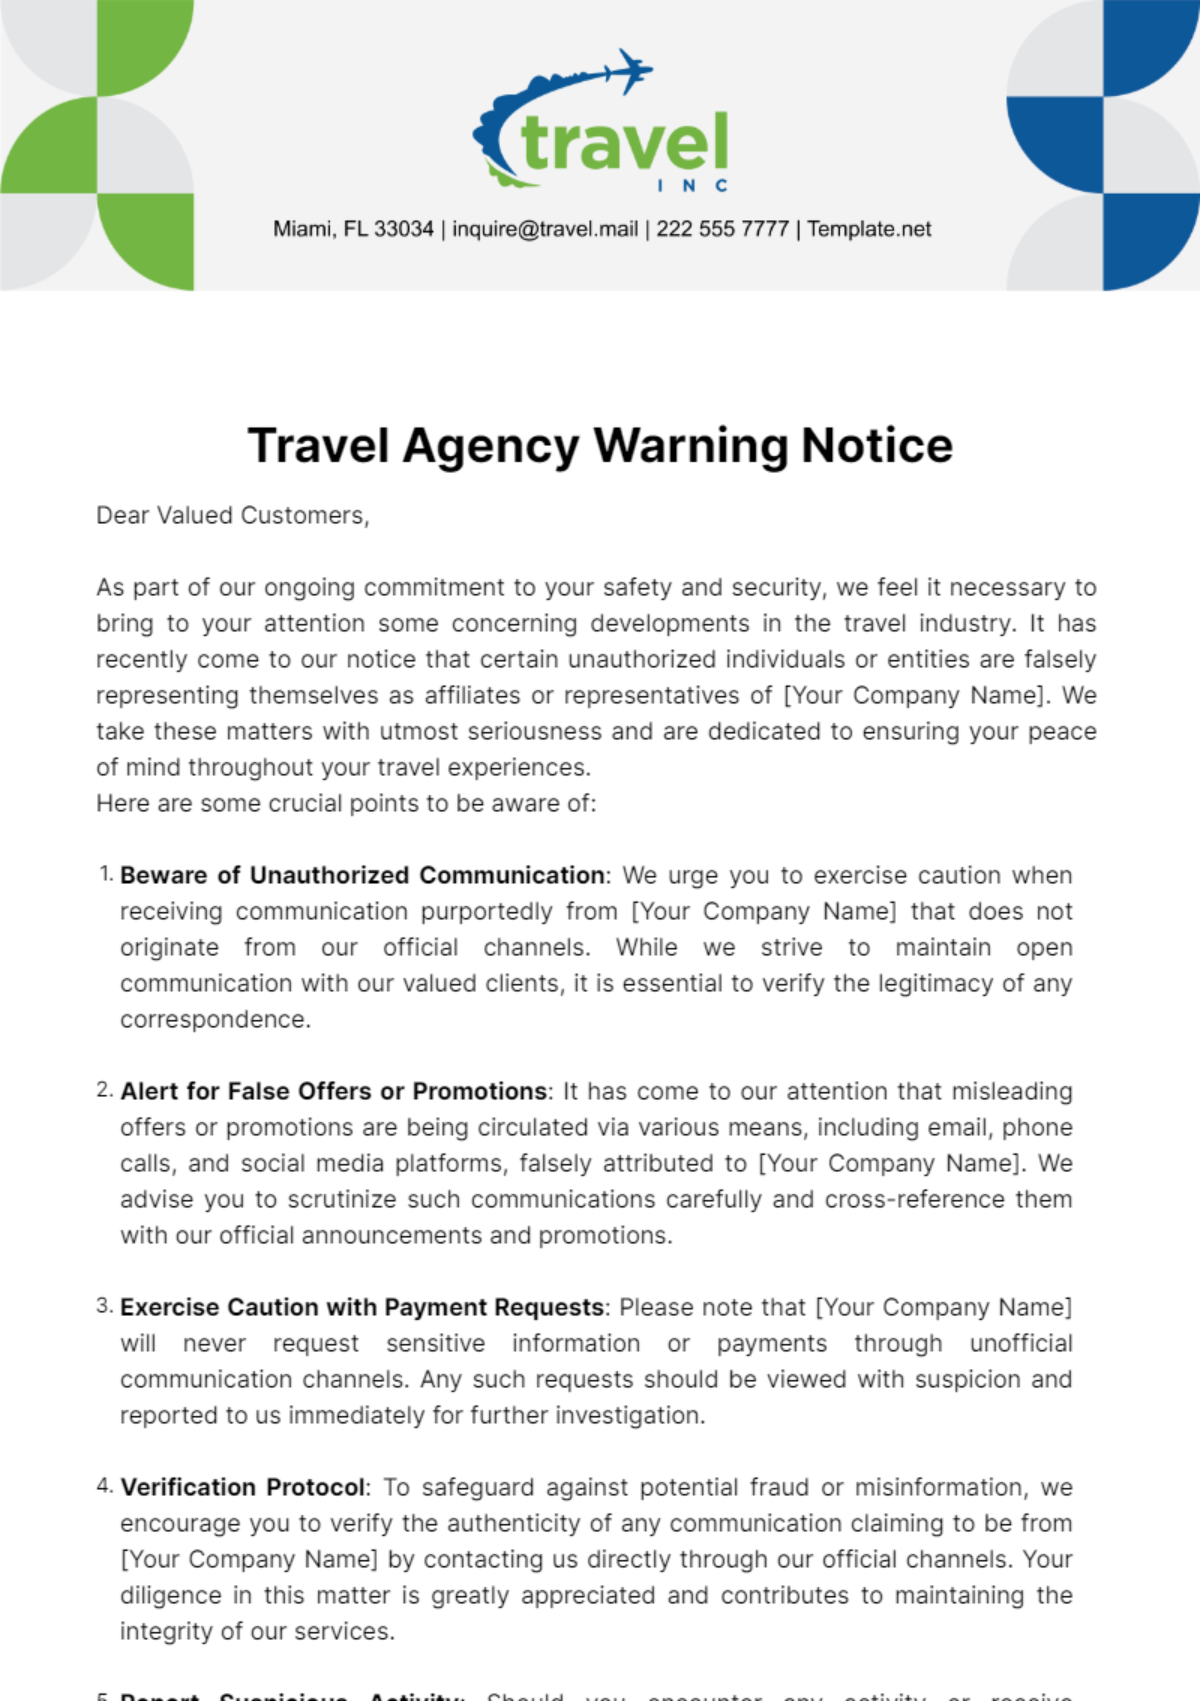 Free Travel Agency Warning Notice Template